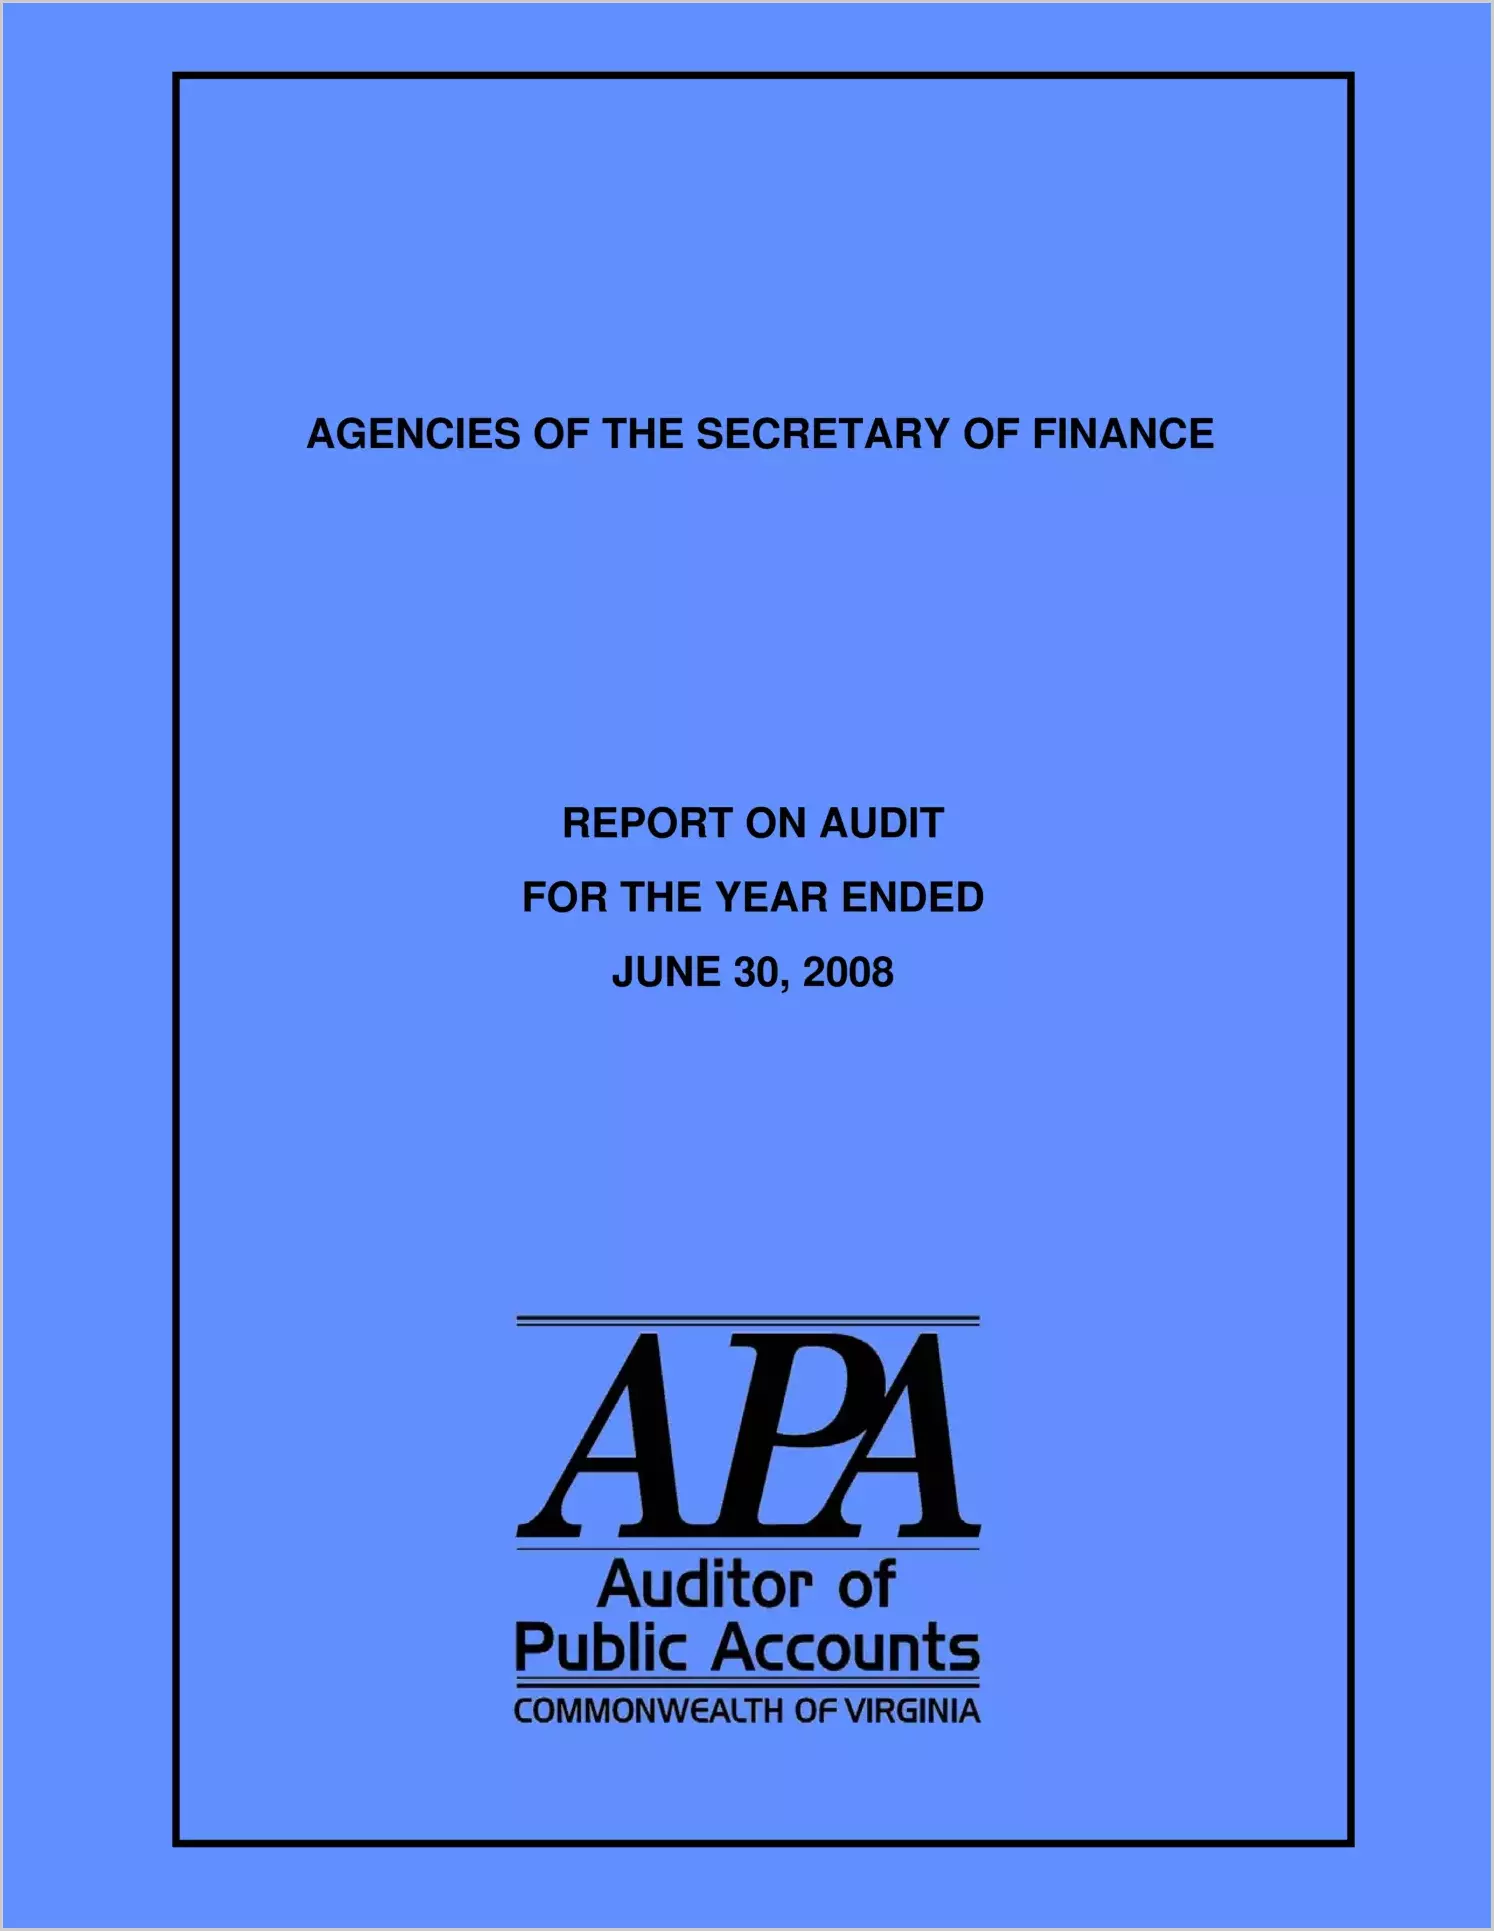 Agencies of the Secretary of Finance report on audit for the year ended June 30, 2008